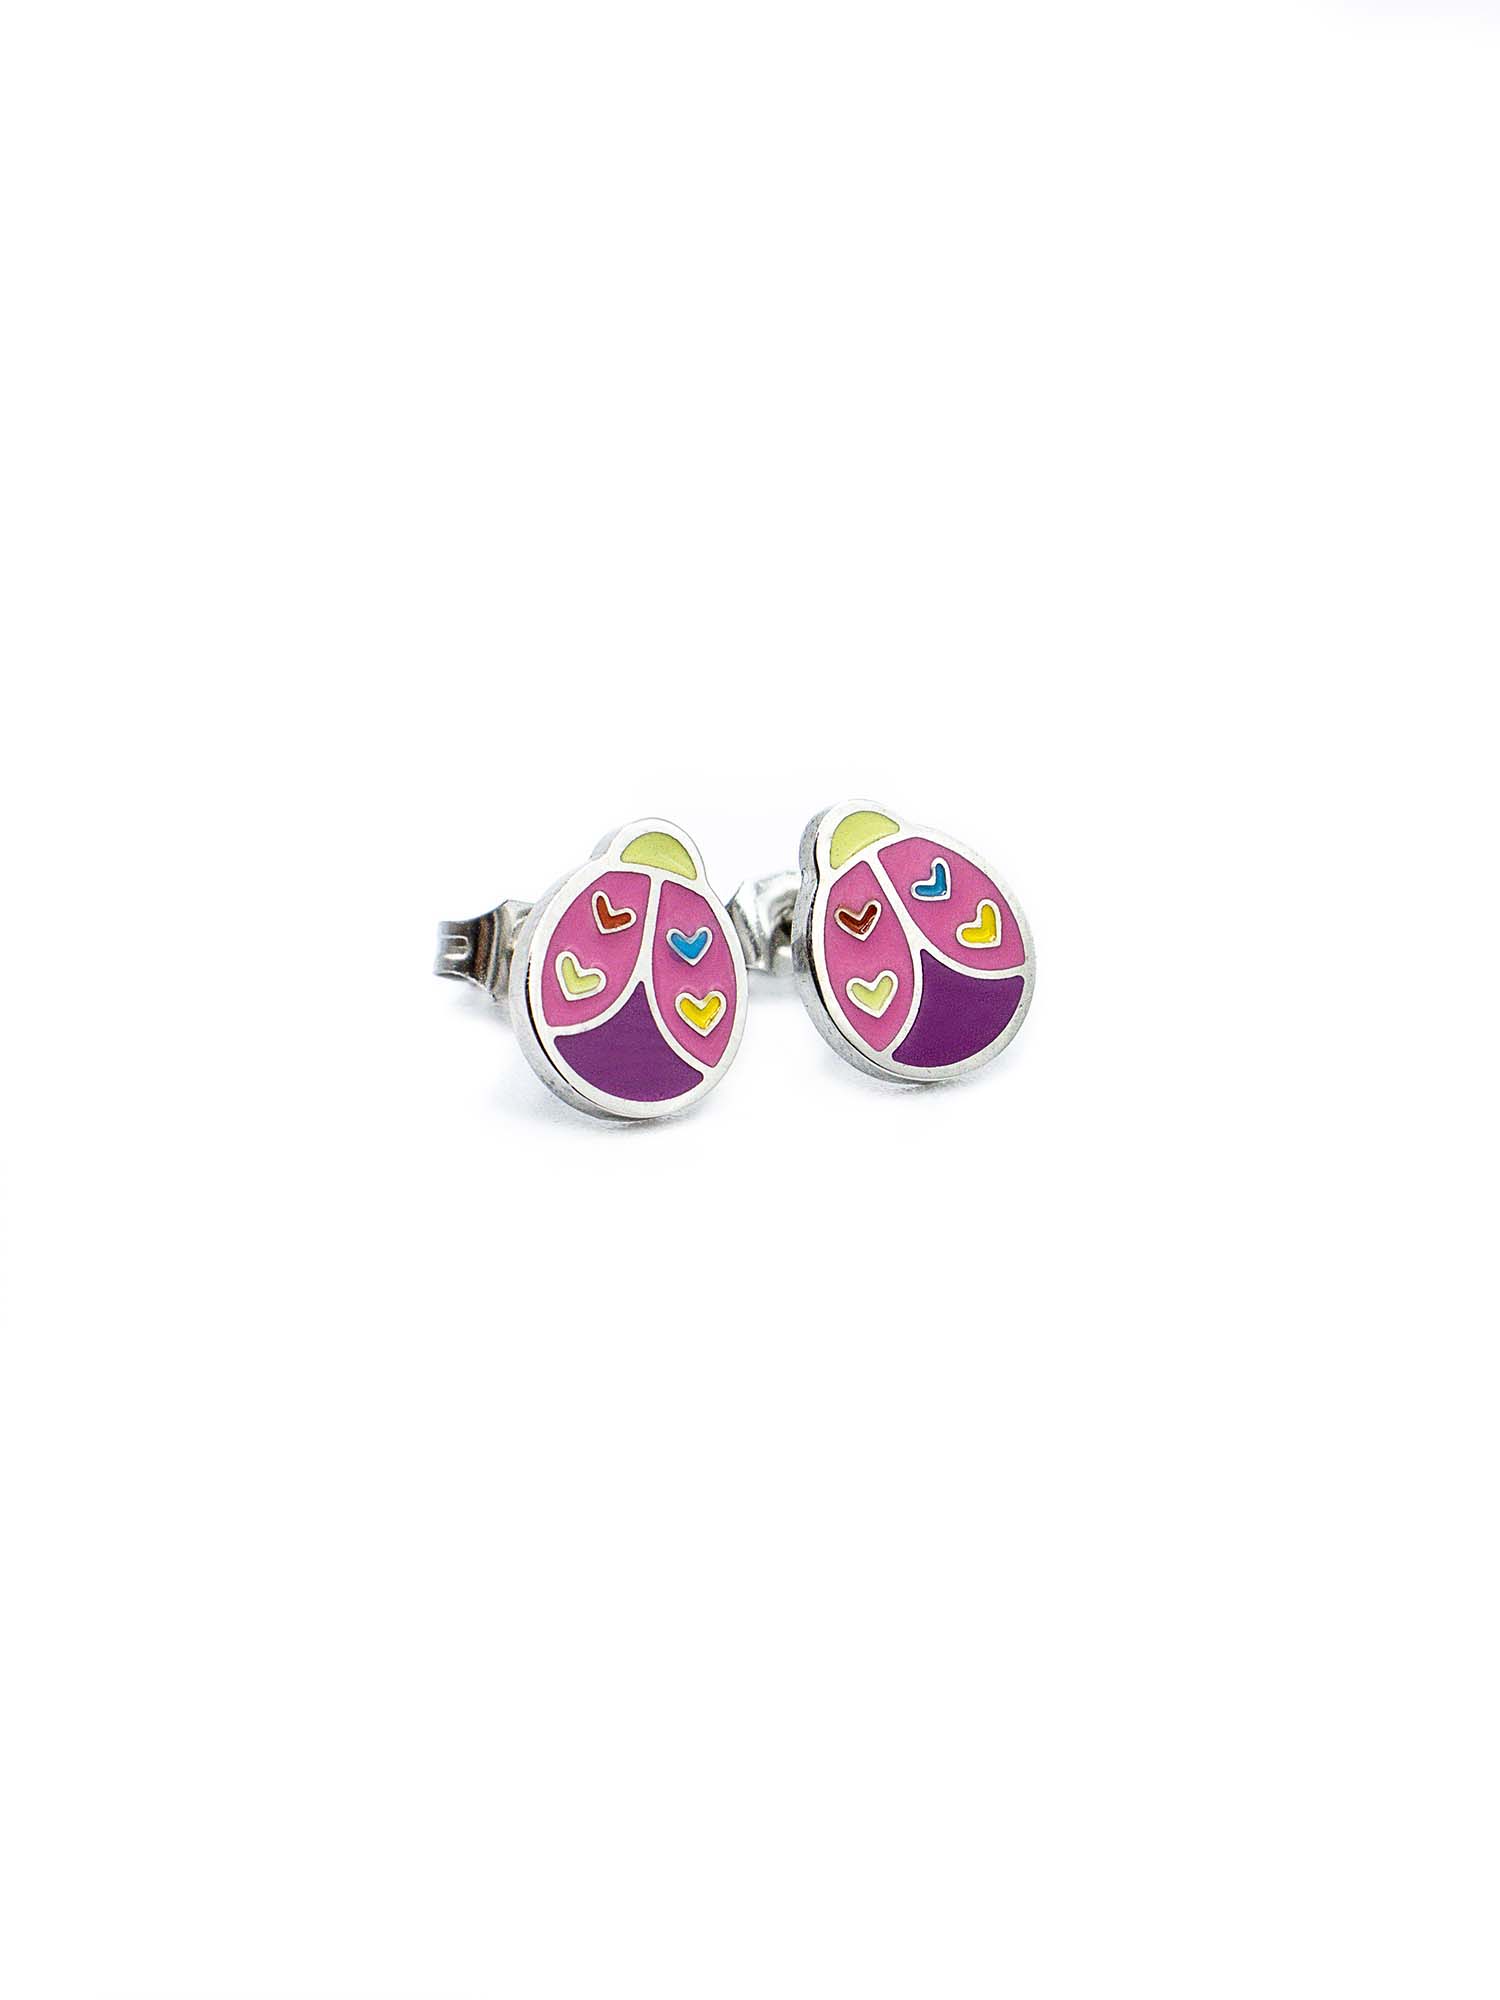 Patchy Luv Bug Studs